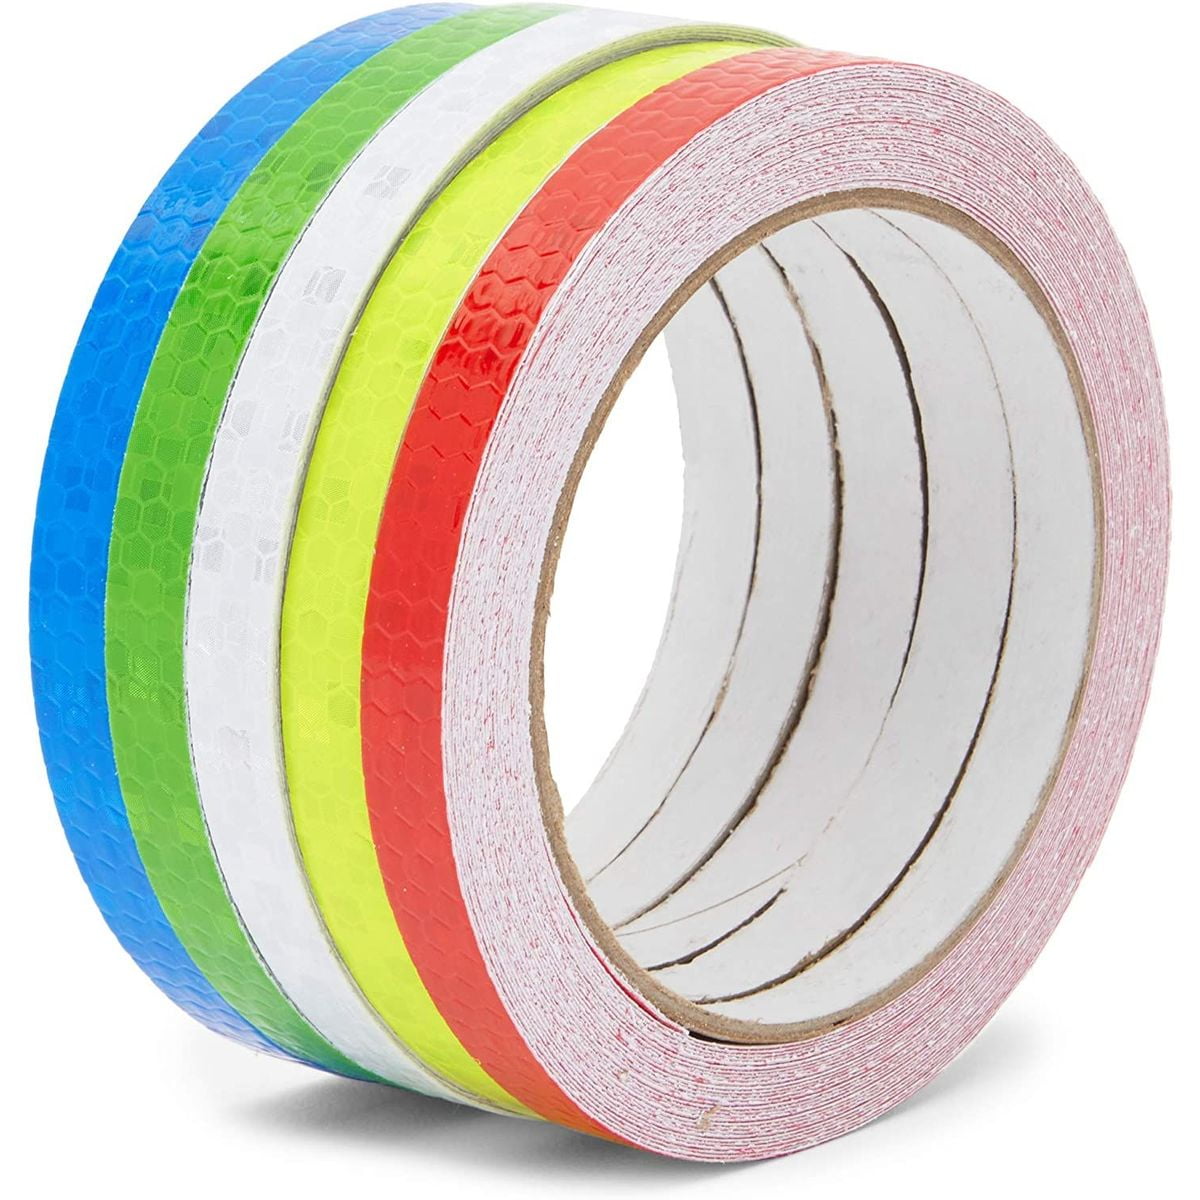 High Intensity Reflective Tape Arrow Safety Self adhesive Any Style UK SELLER 